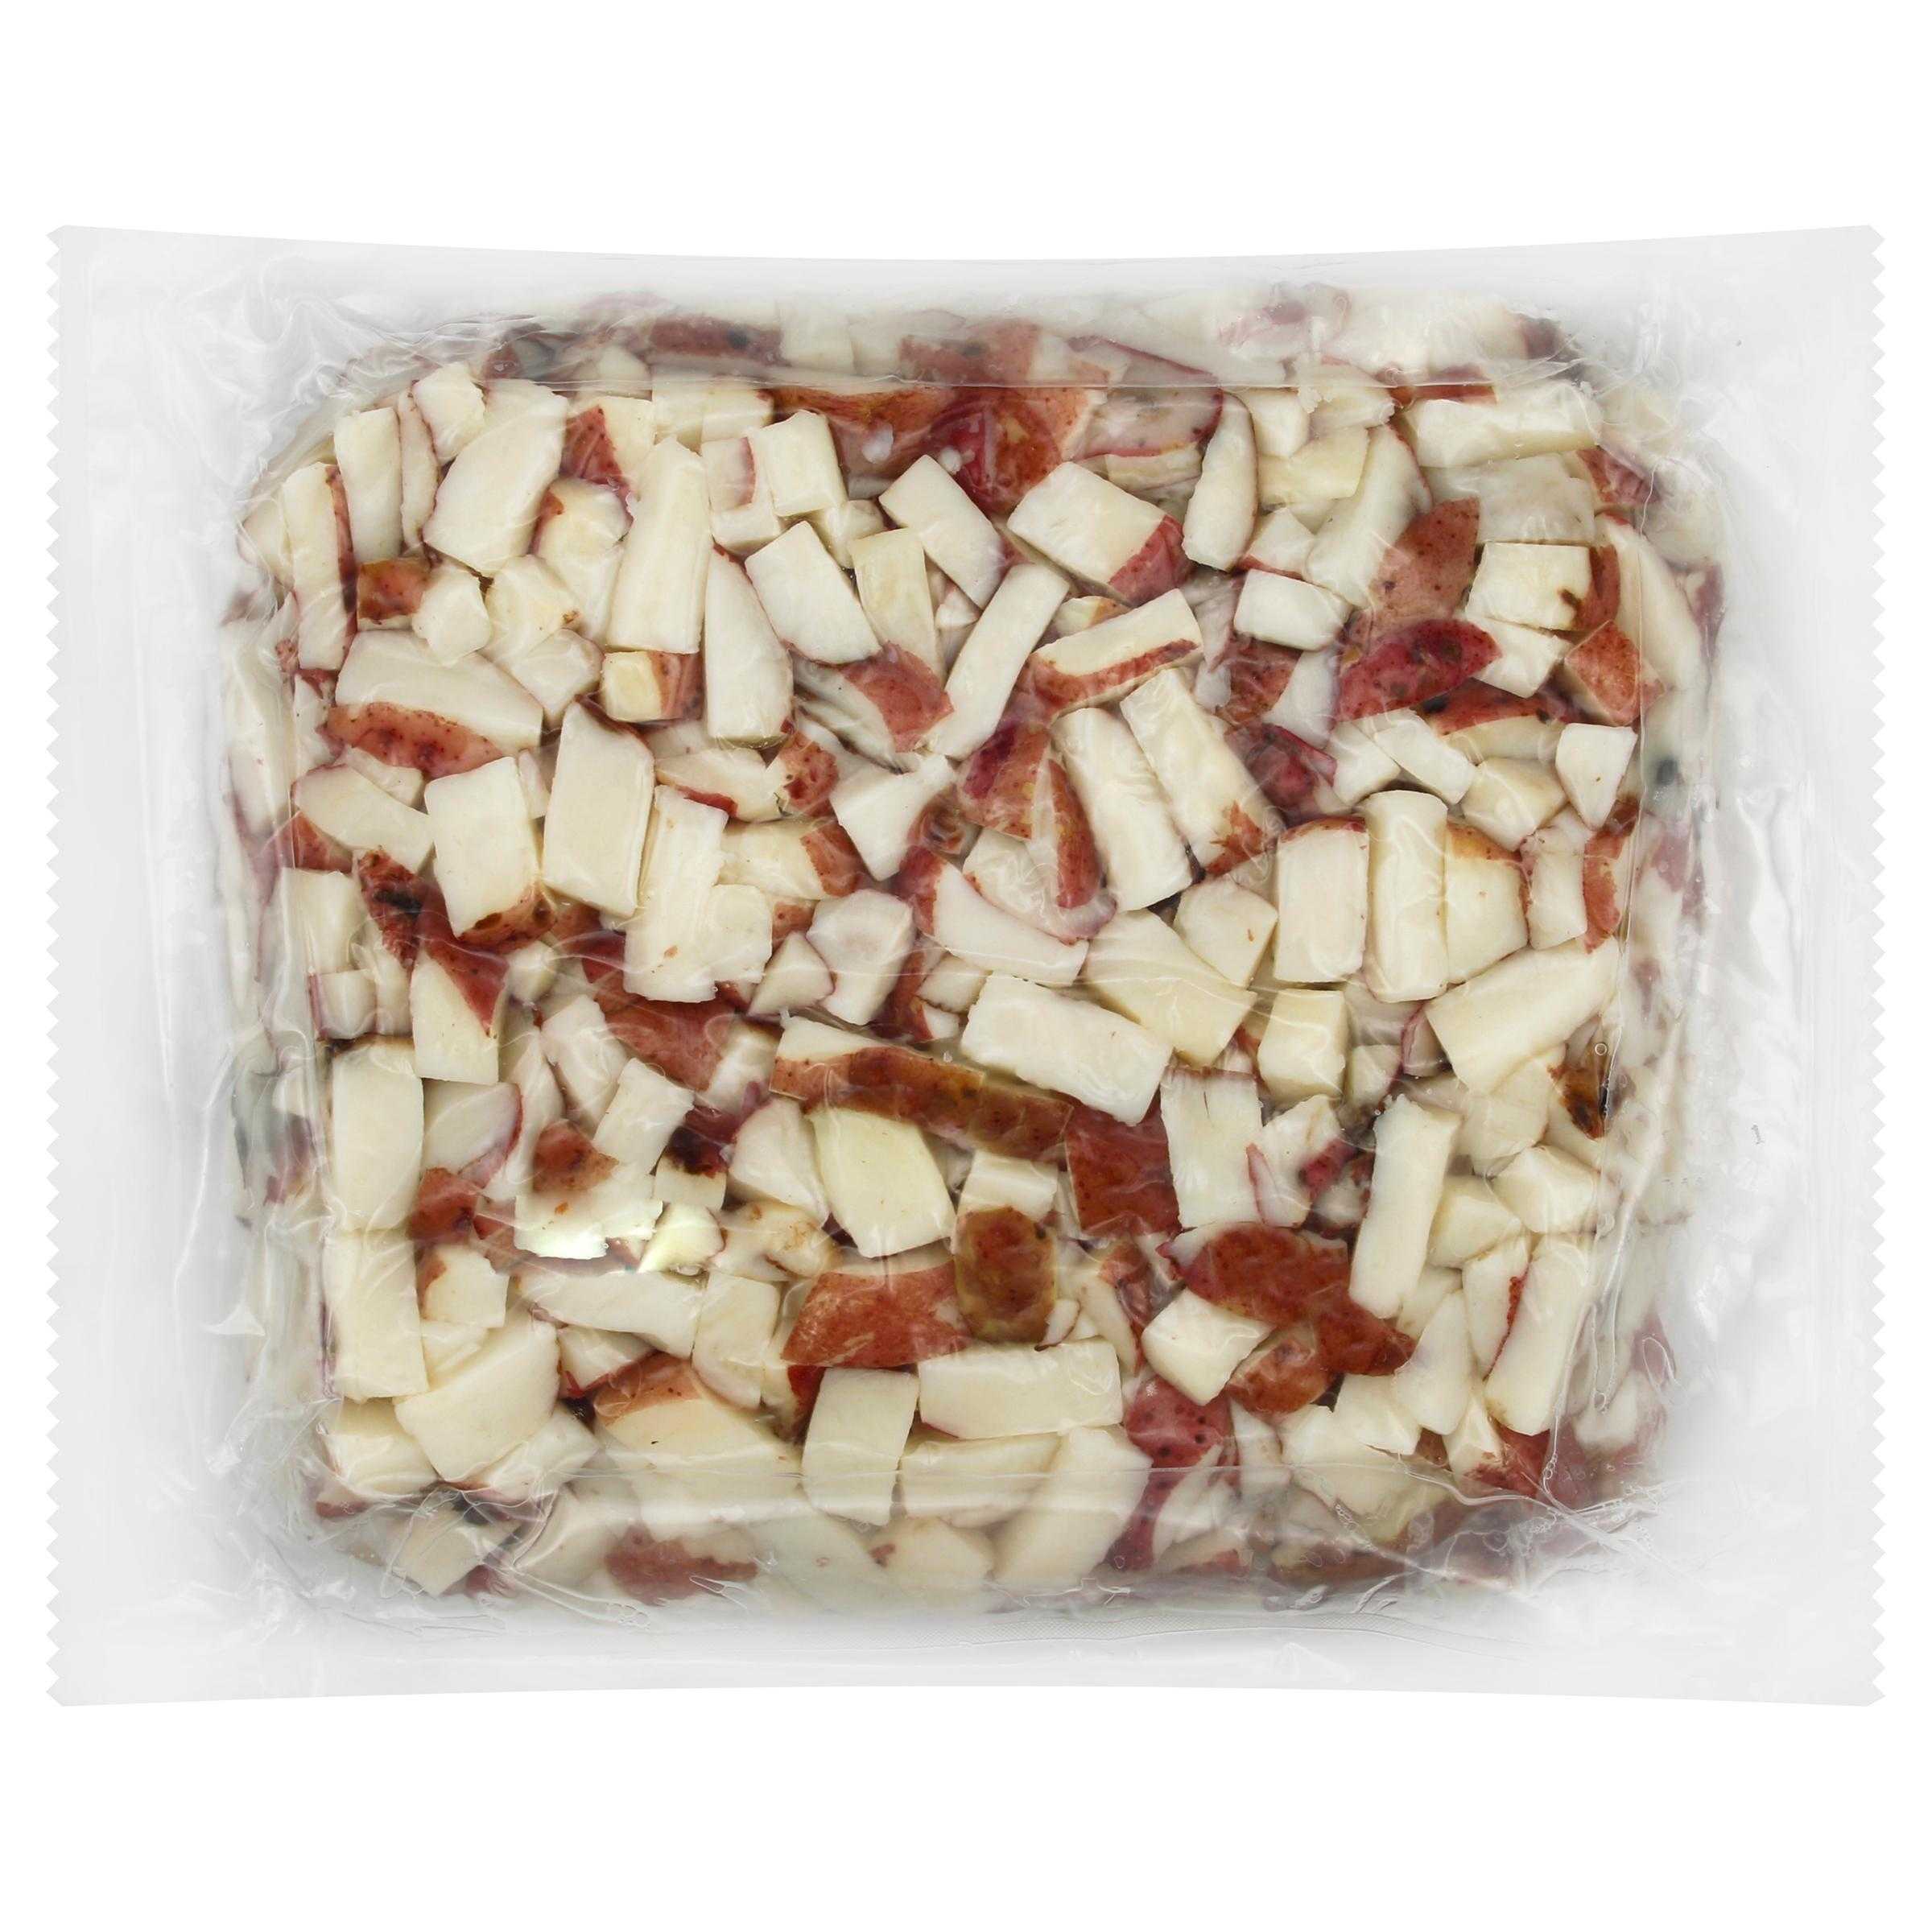 Simply Potatoes® Refrigerated 1 1/2″ Red Skin Diced Potatoes made with skin-on Red potatoes diced 1/2″ x 1 1/2″ x 3/4″, 2/10 Lb Bags